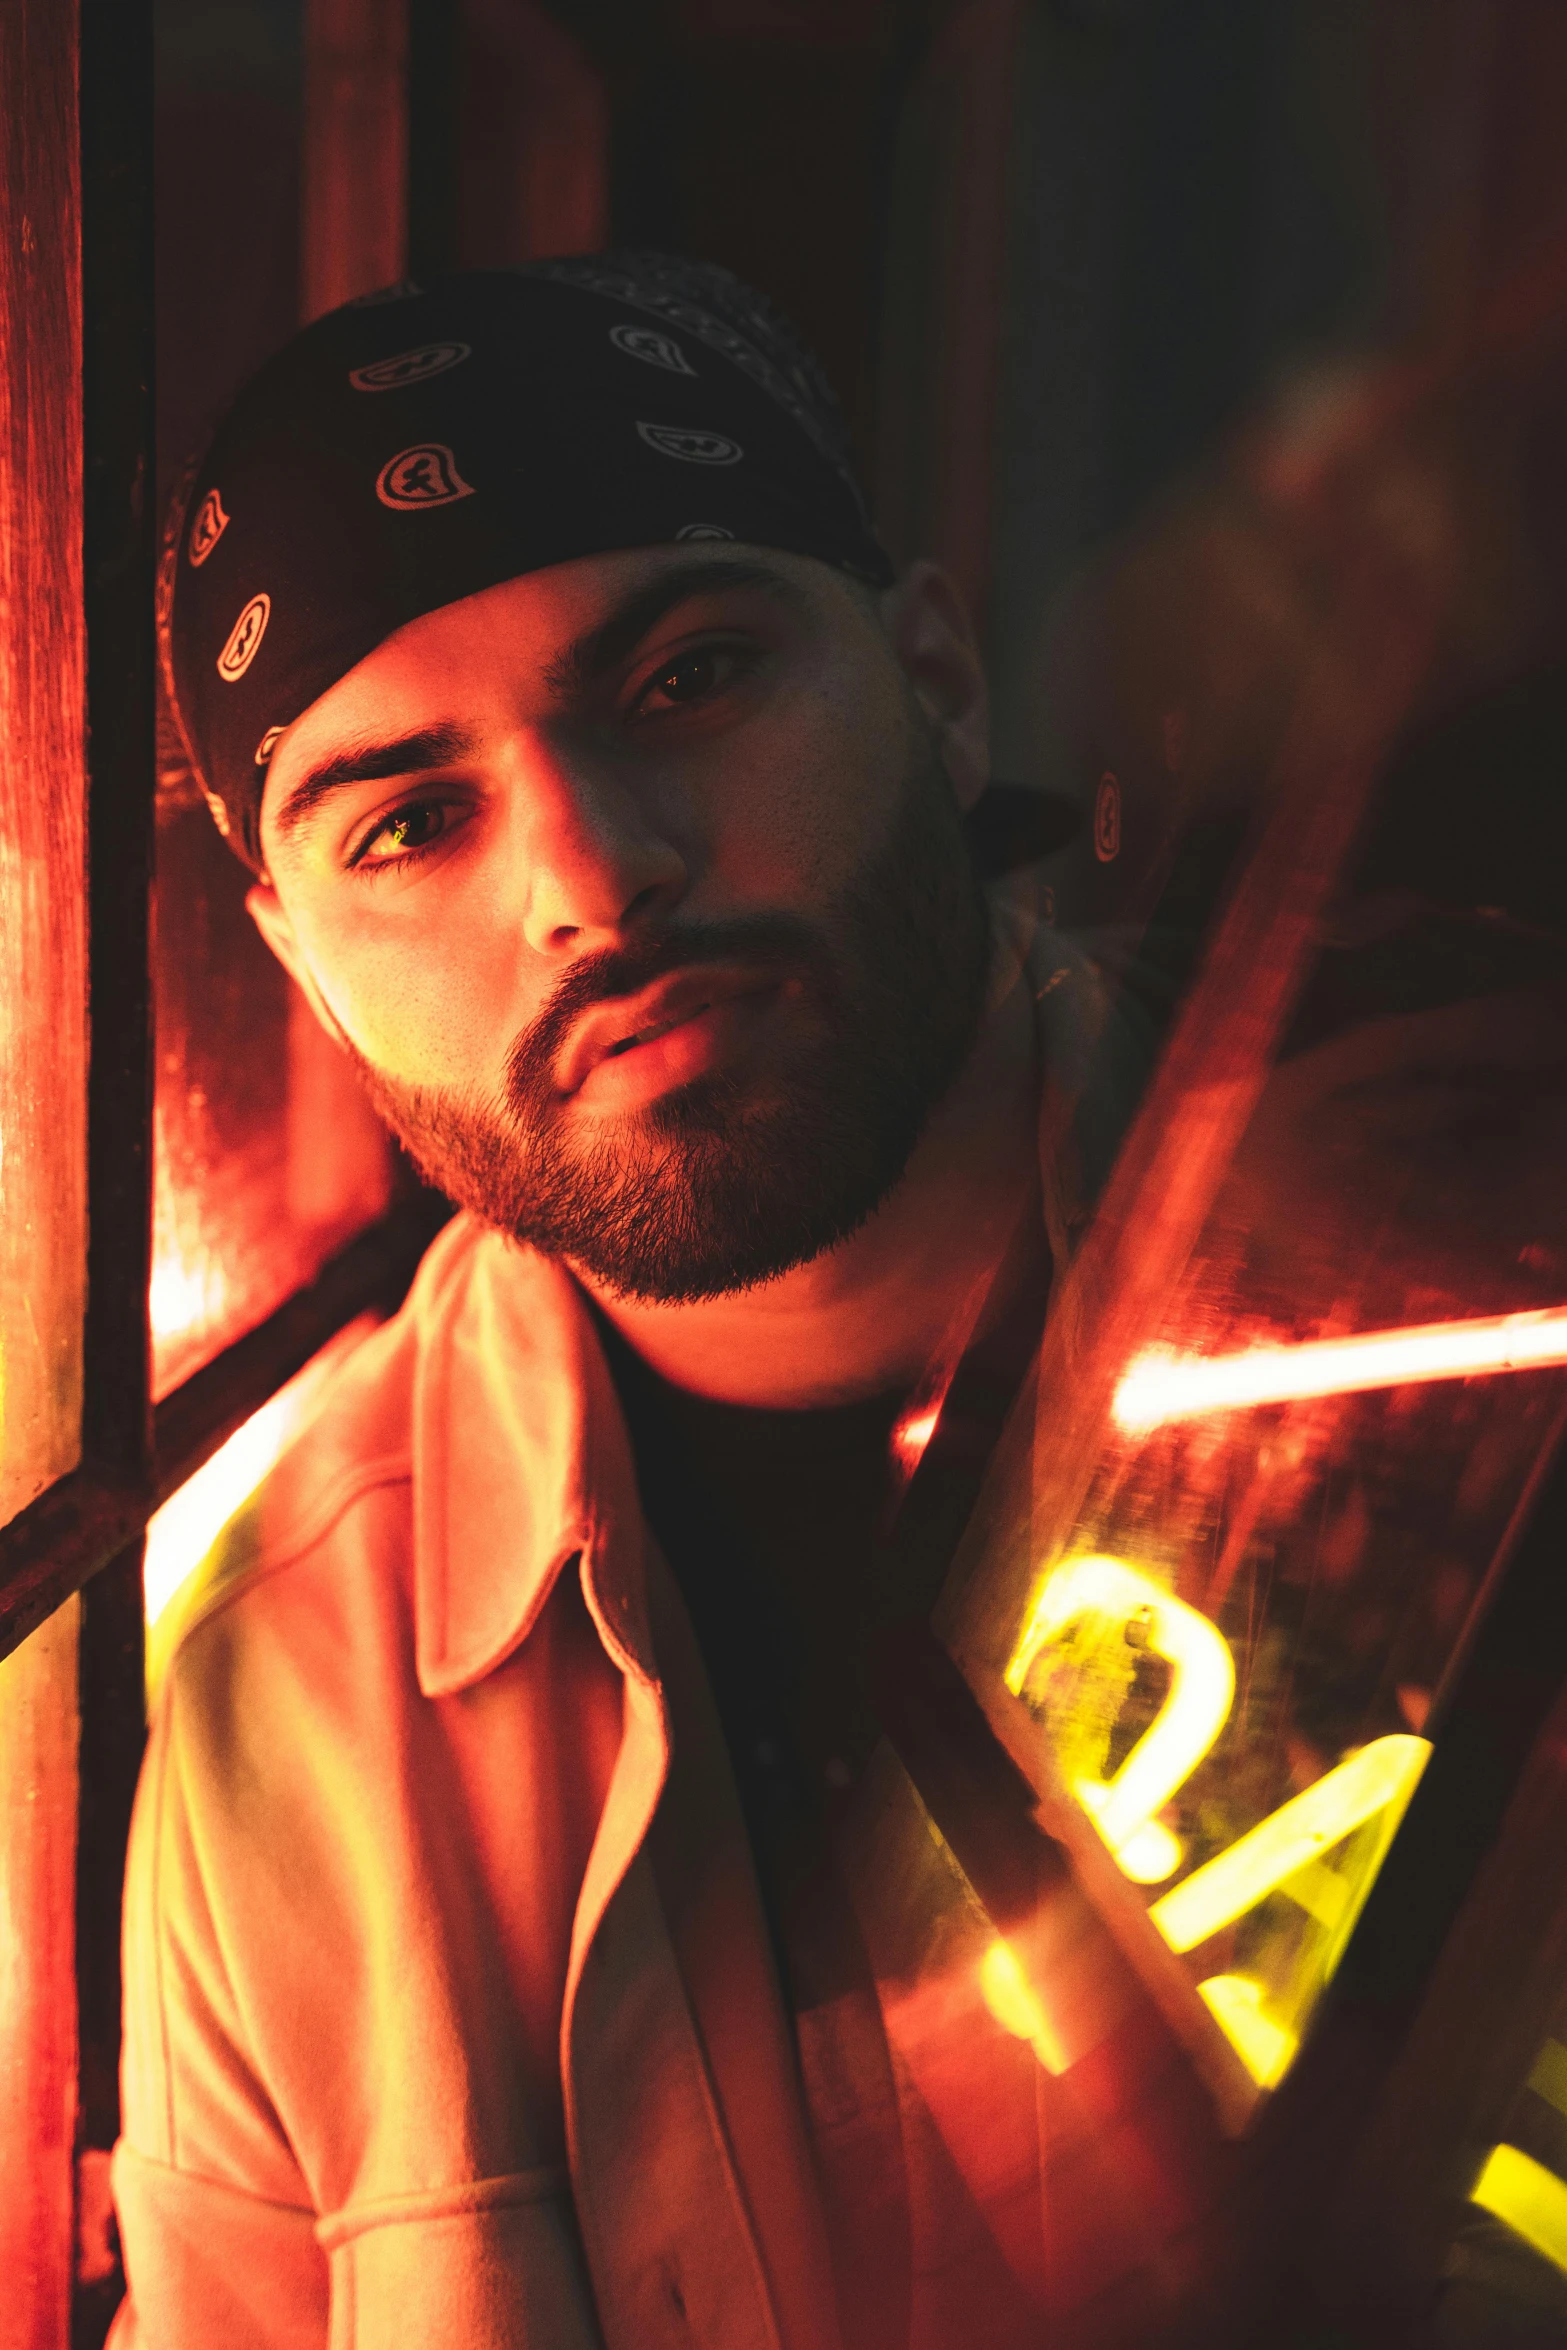 a man holding a baseball bat next to a window, an album cover, by Robbie Trevino, lyco art, high red lights, arab man light beard, looking to camera, wearing a bandana and chain